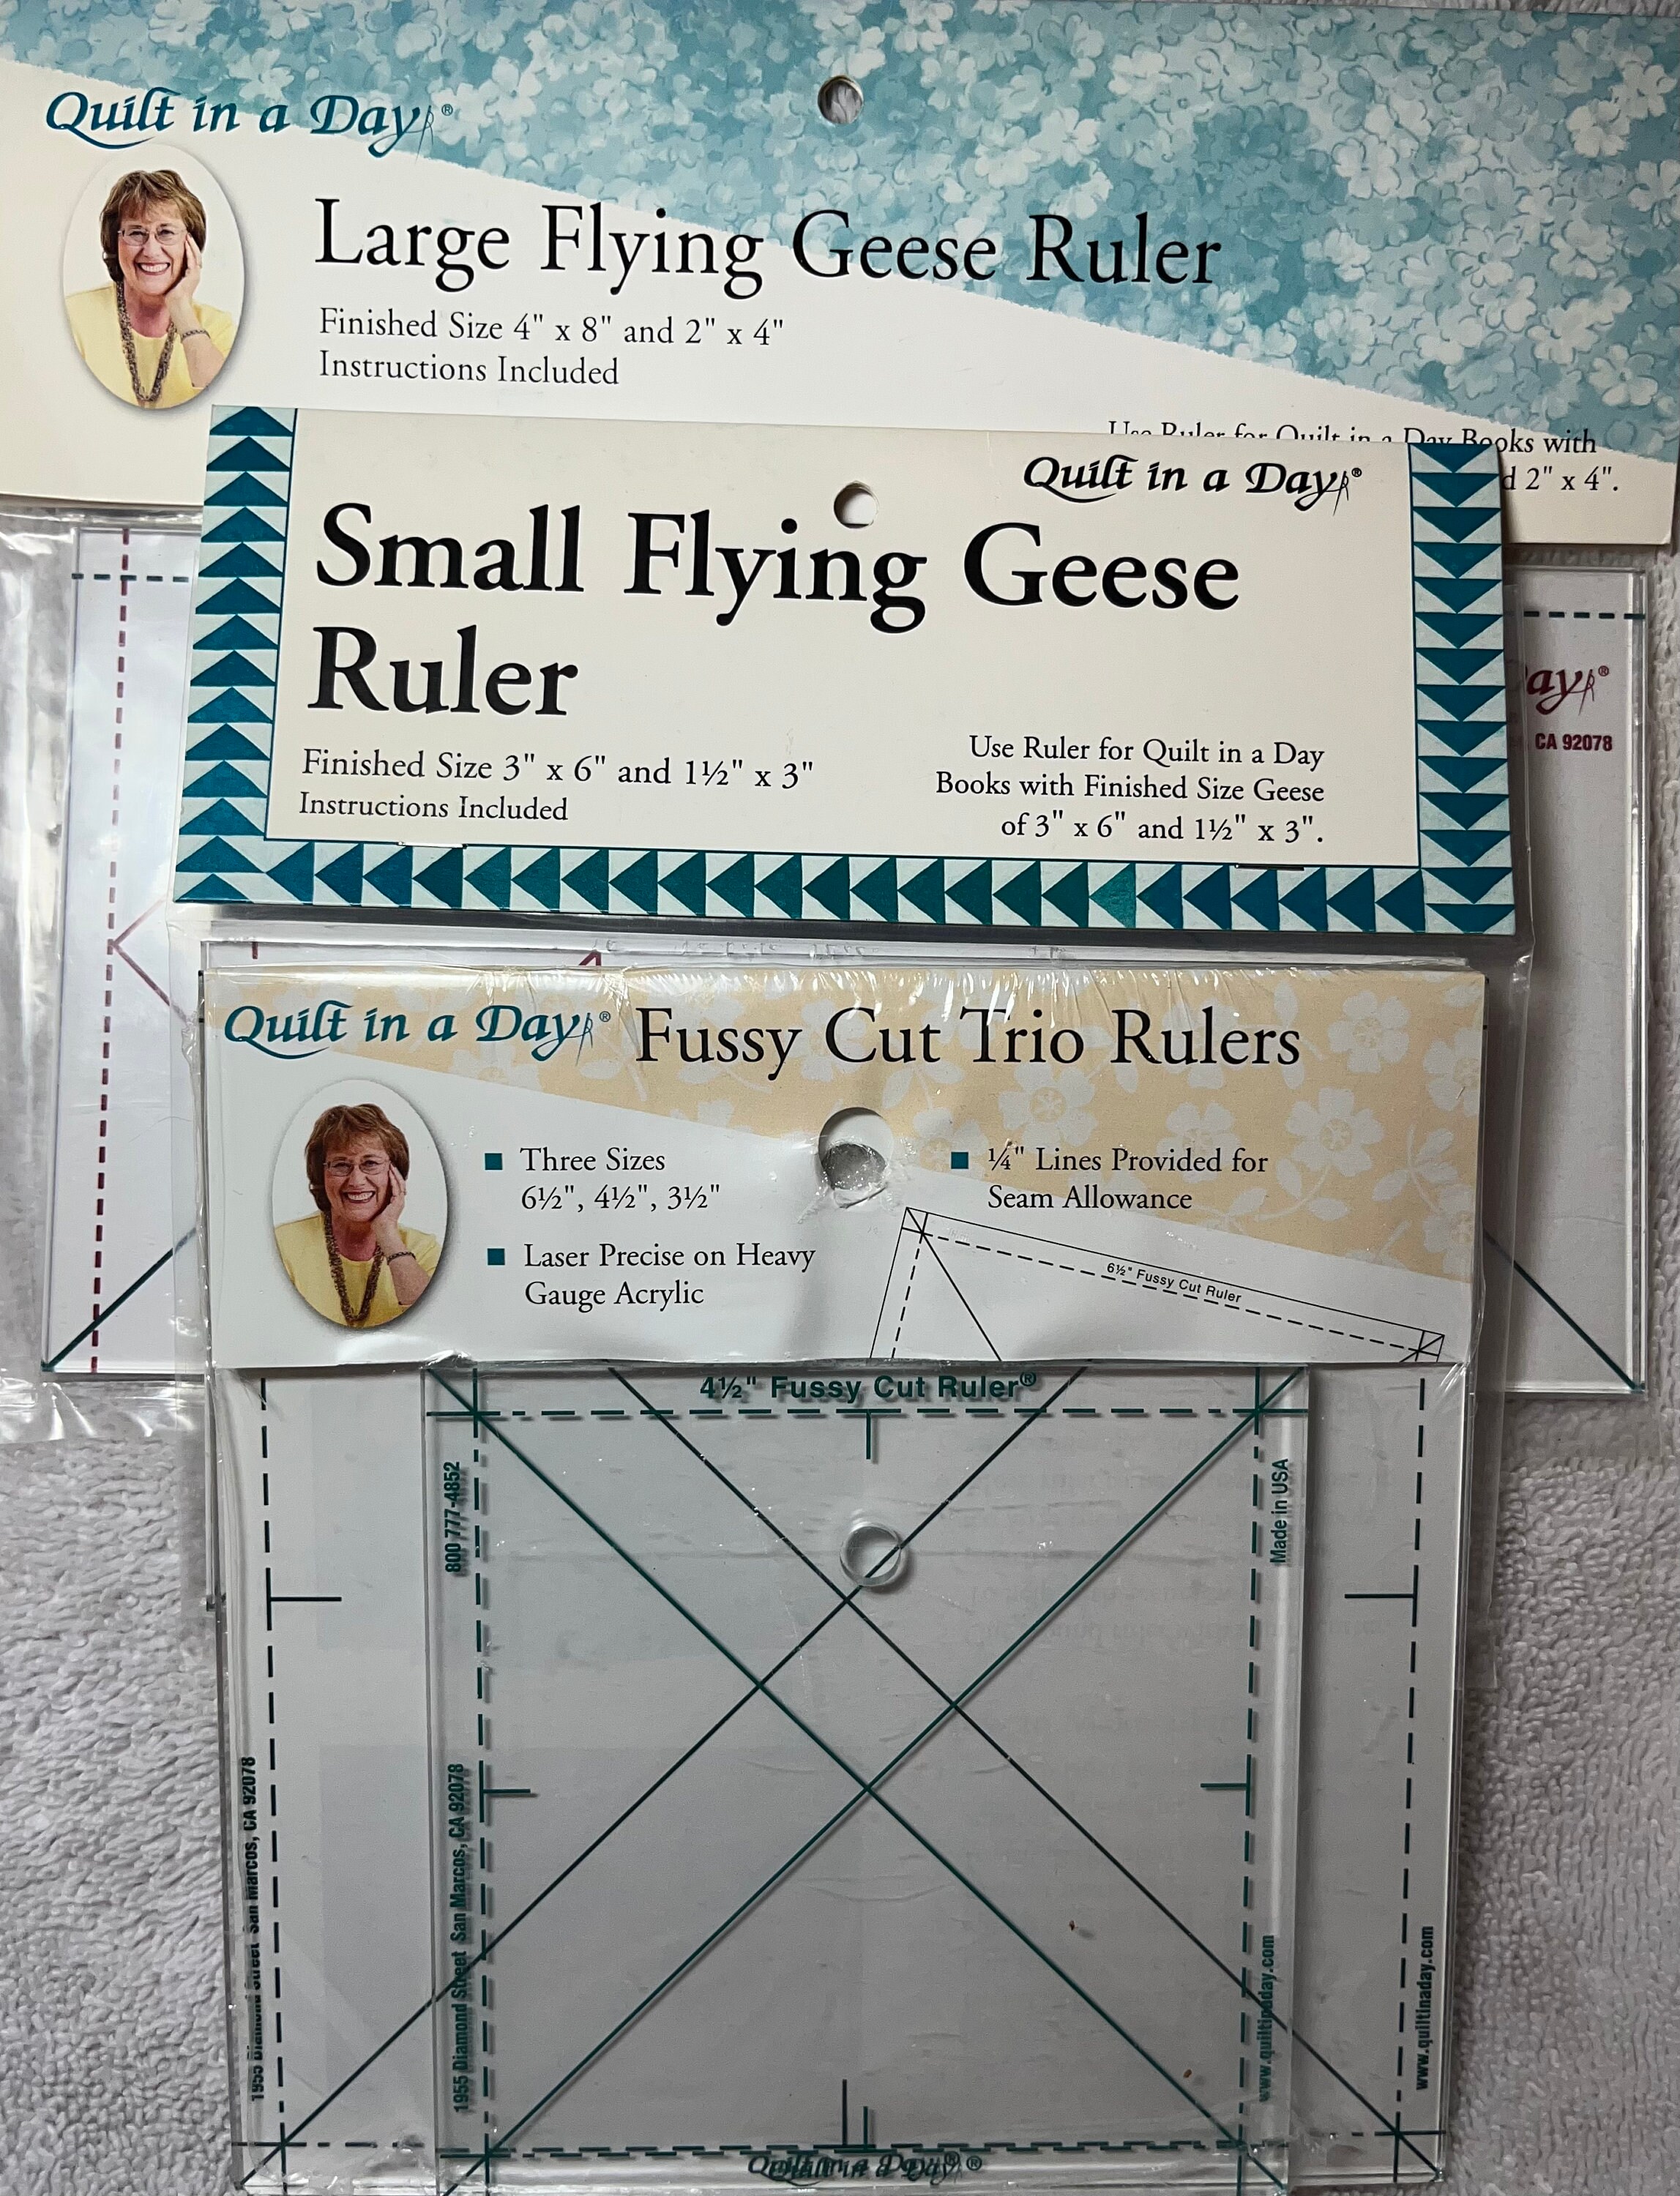 Large Flying Geese Ruler